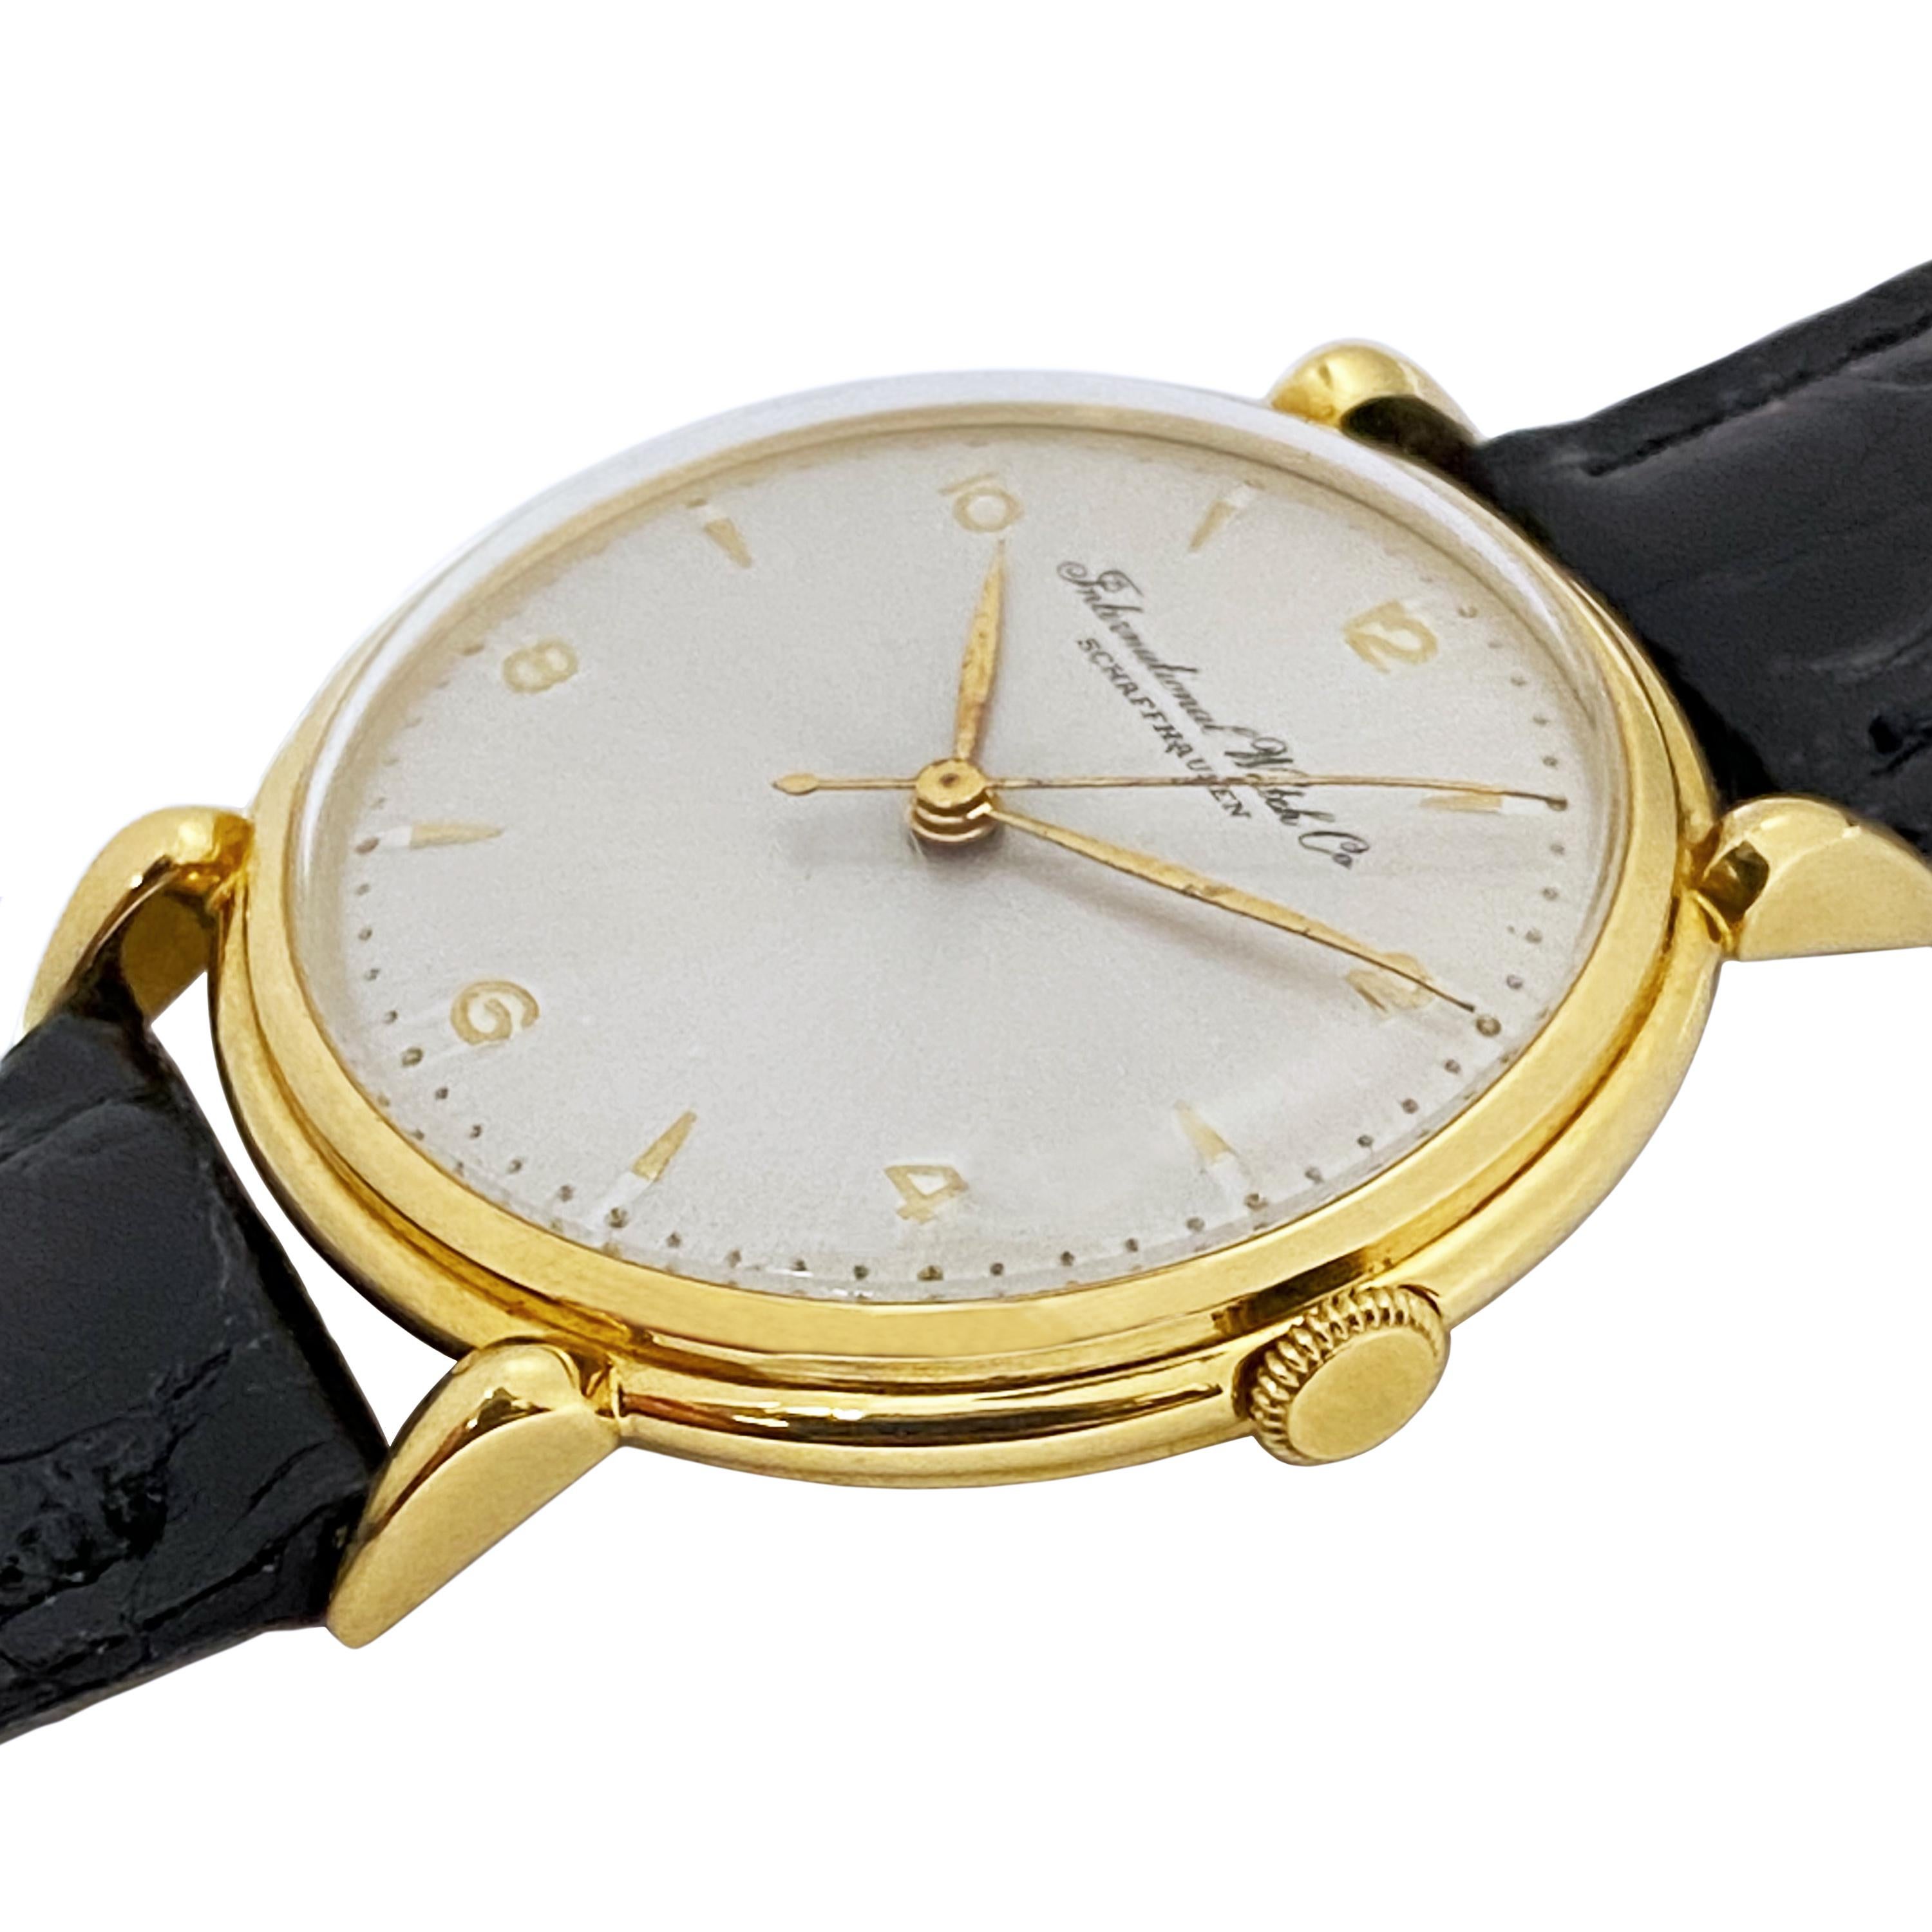 Circa 1950 International Watch Company Schaffhausen Wrist Watch, 36 M.M. 18k Yellow Gold 2 piece stepped case with Horn Rim Lugs. 17 jewel Manual wind movement, Silver satin dial with raised gold markers and a sweep seconds hand. New Black Crocodile